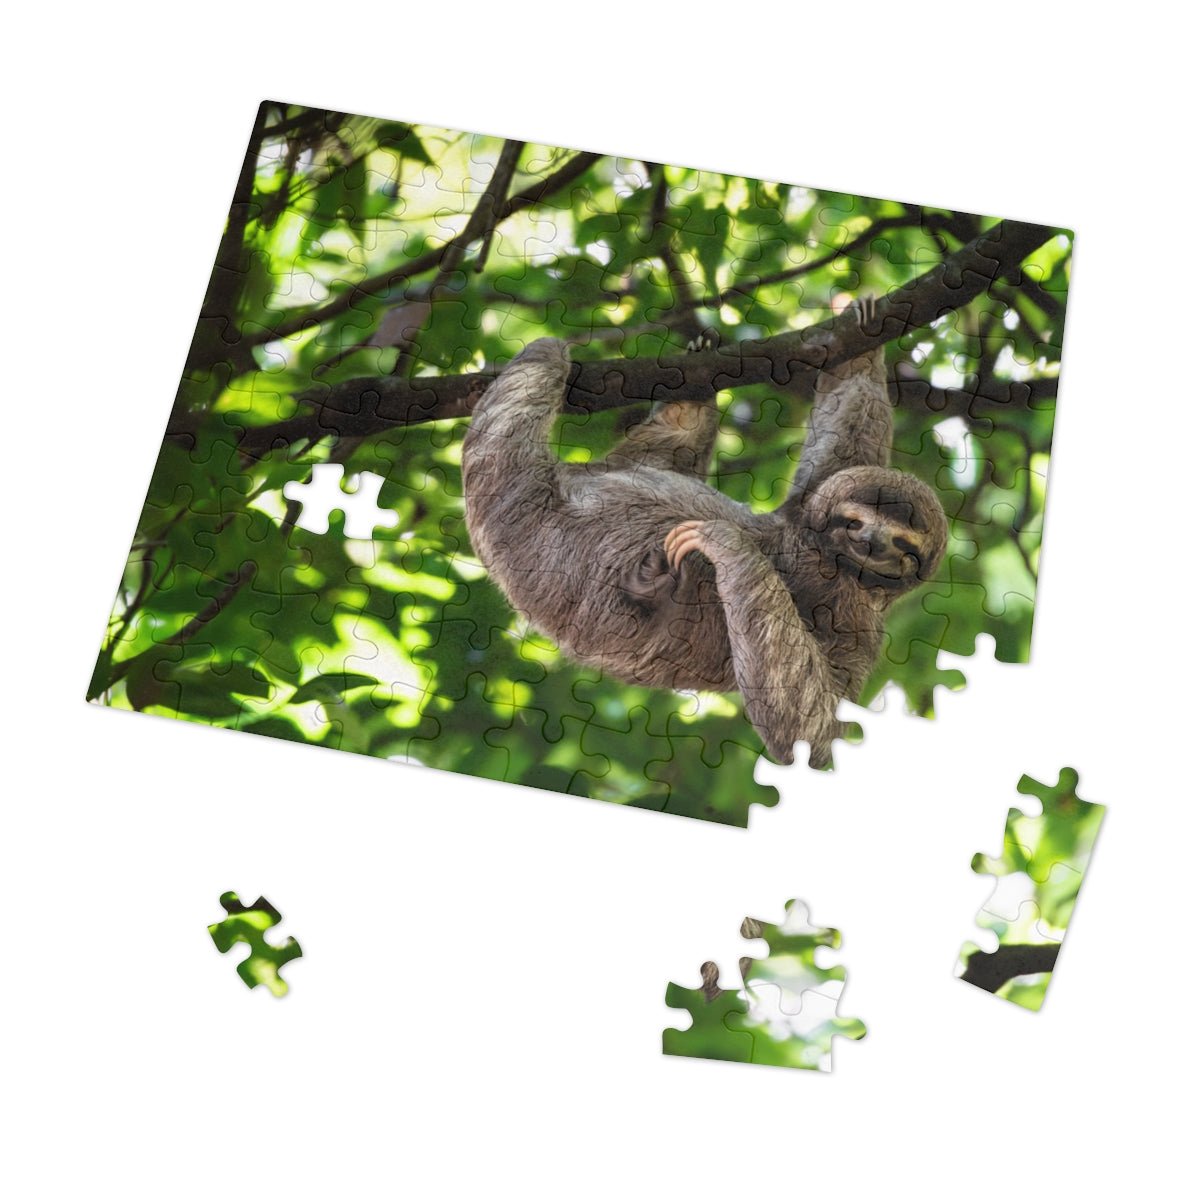 Cute Hanging Sloth Jigsaw Puzzle - Puffin Lime